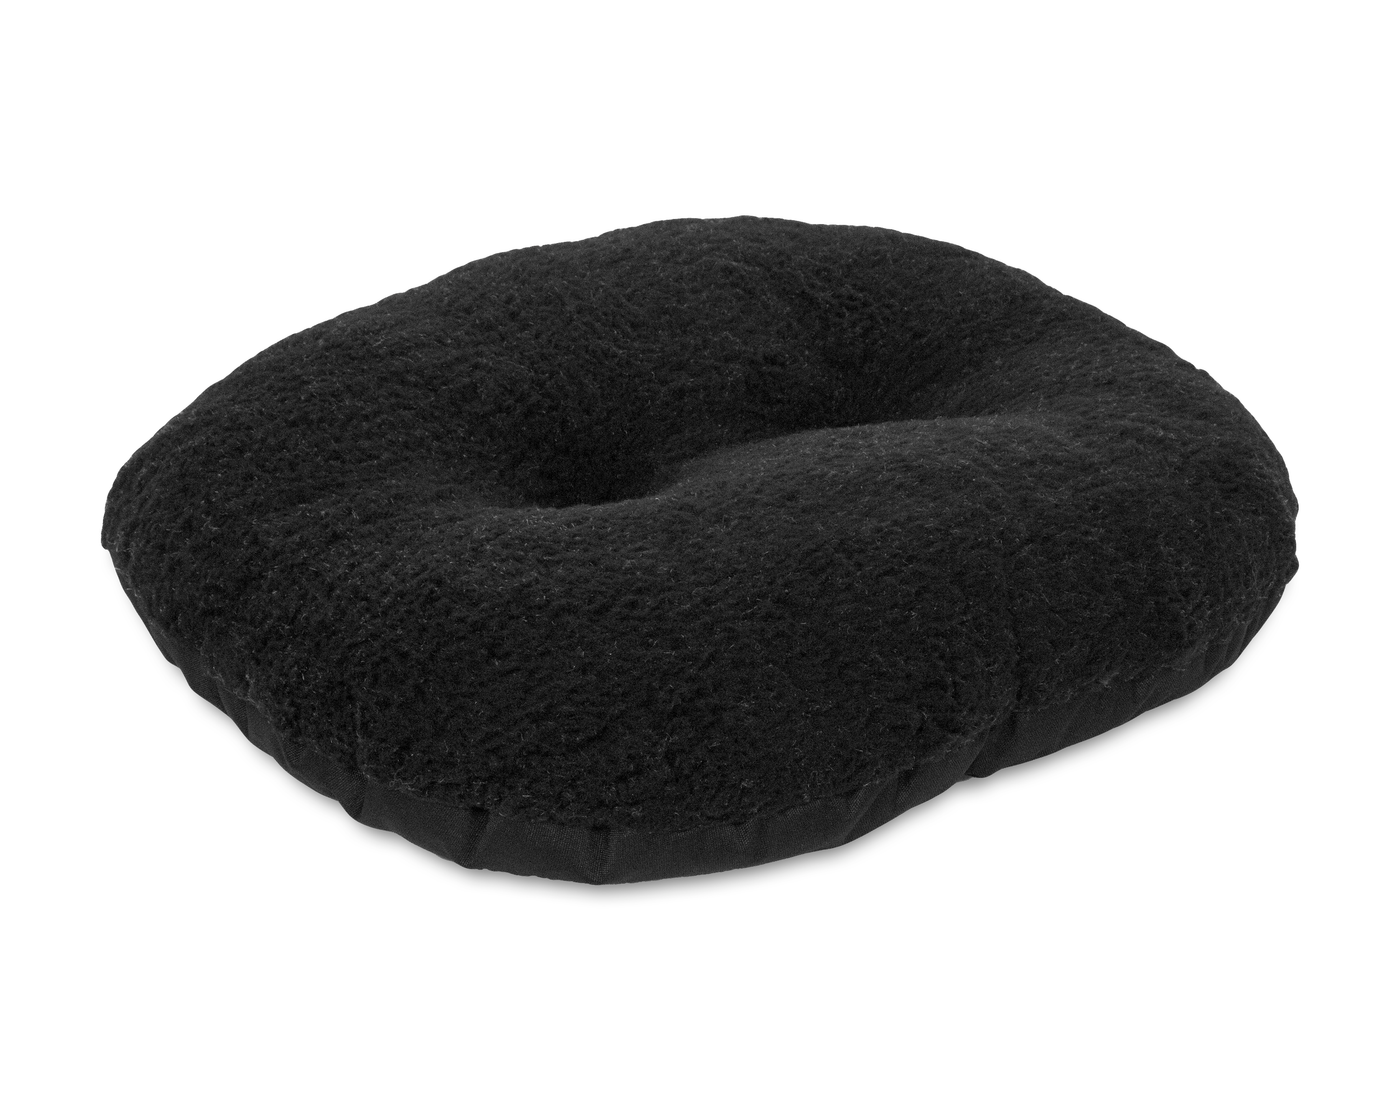 replaceable inner cushion for waterproof dog bed in black